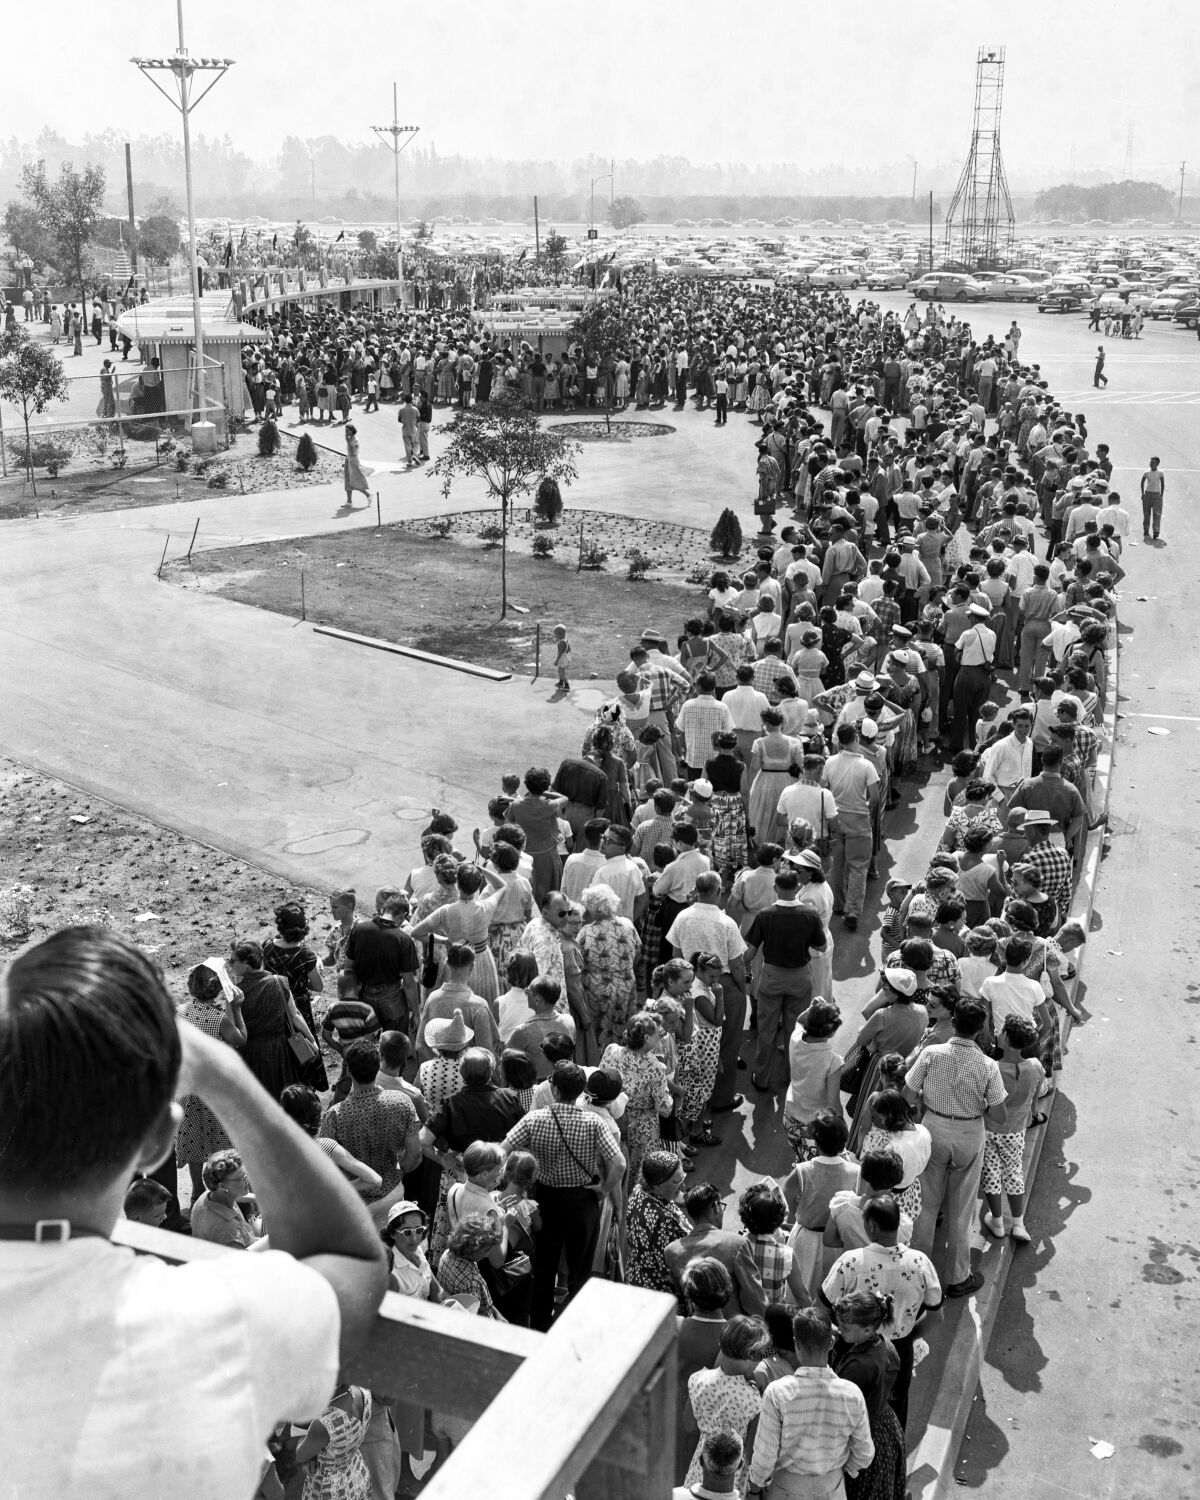 An archival black-and-white photo of a long line of people waiting to enter Disneyland.